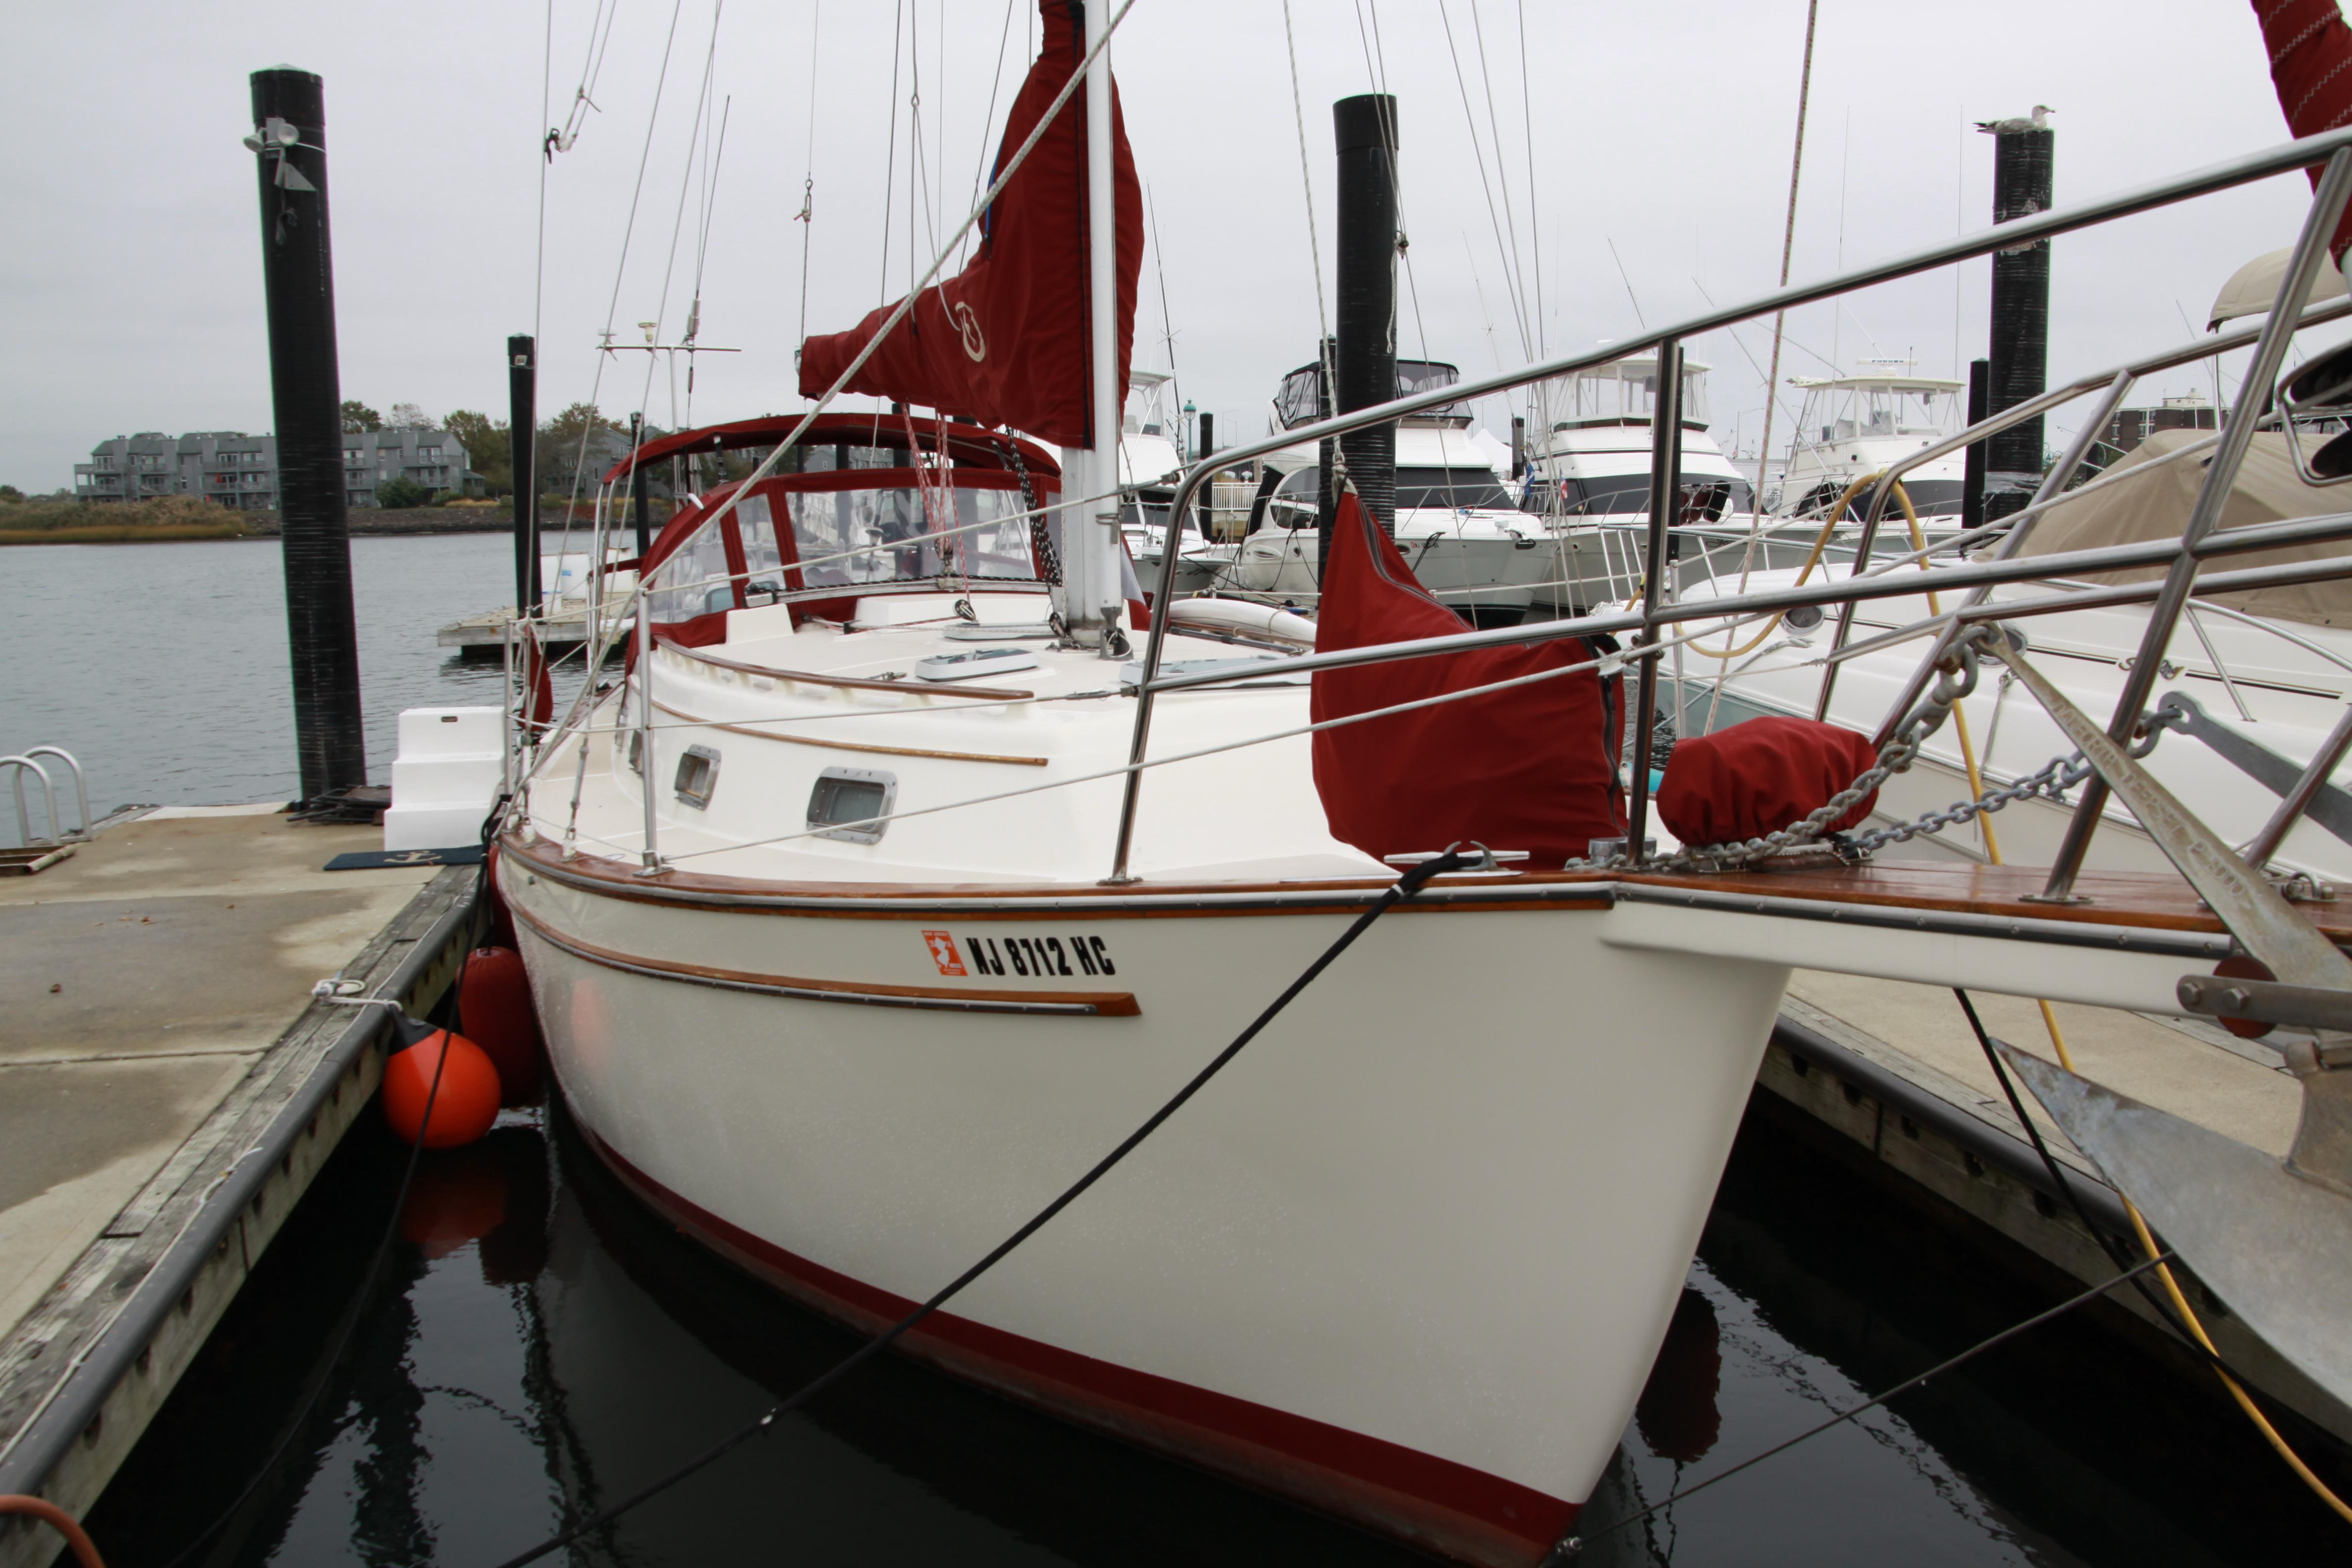 Island Packet 31, Point Pleasant